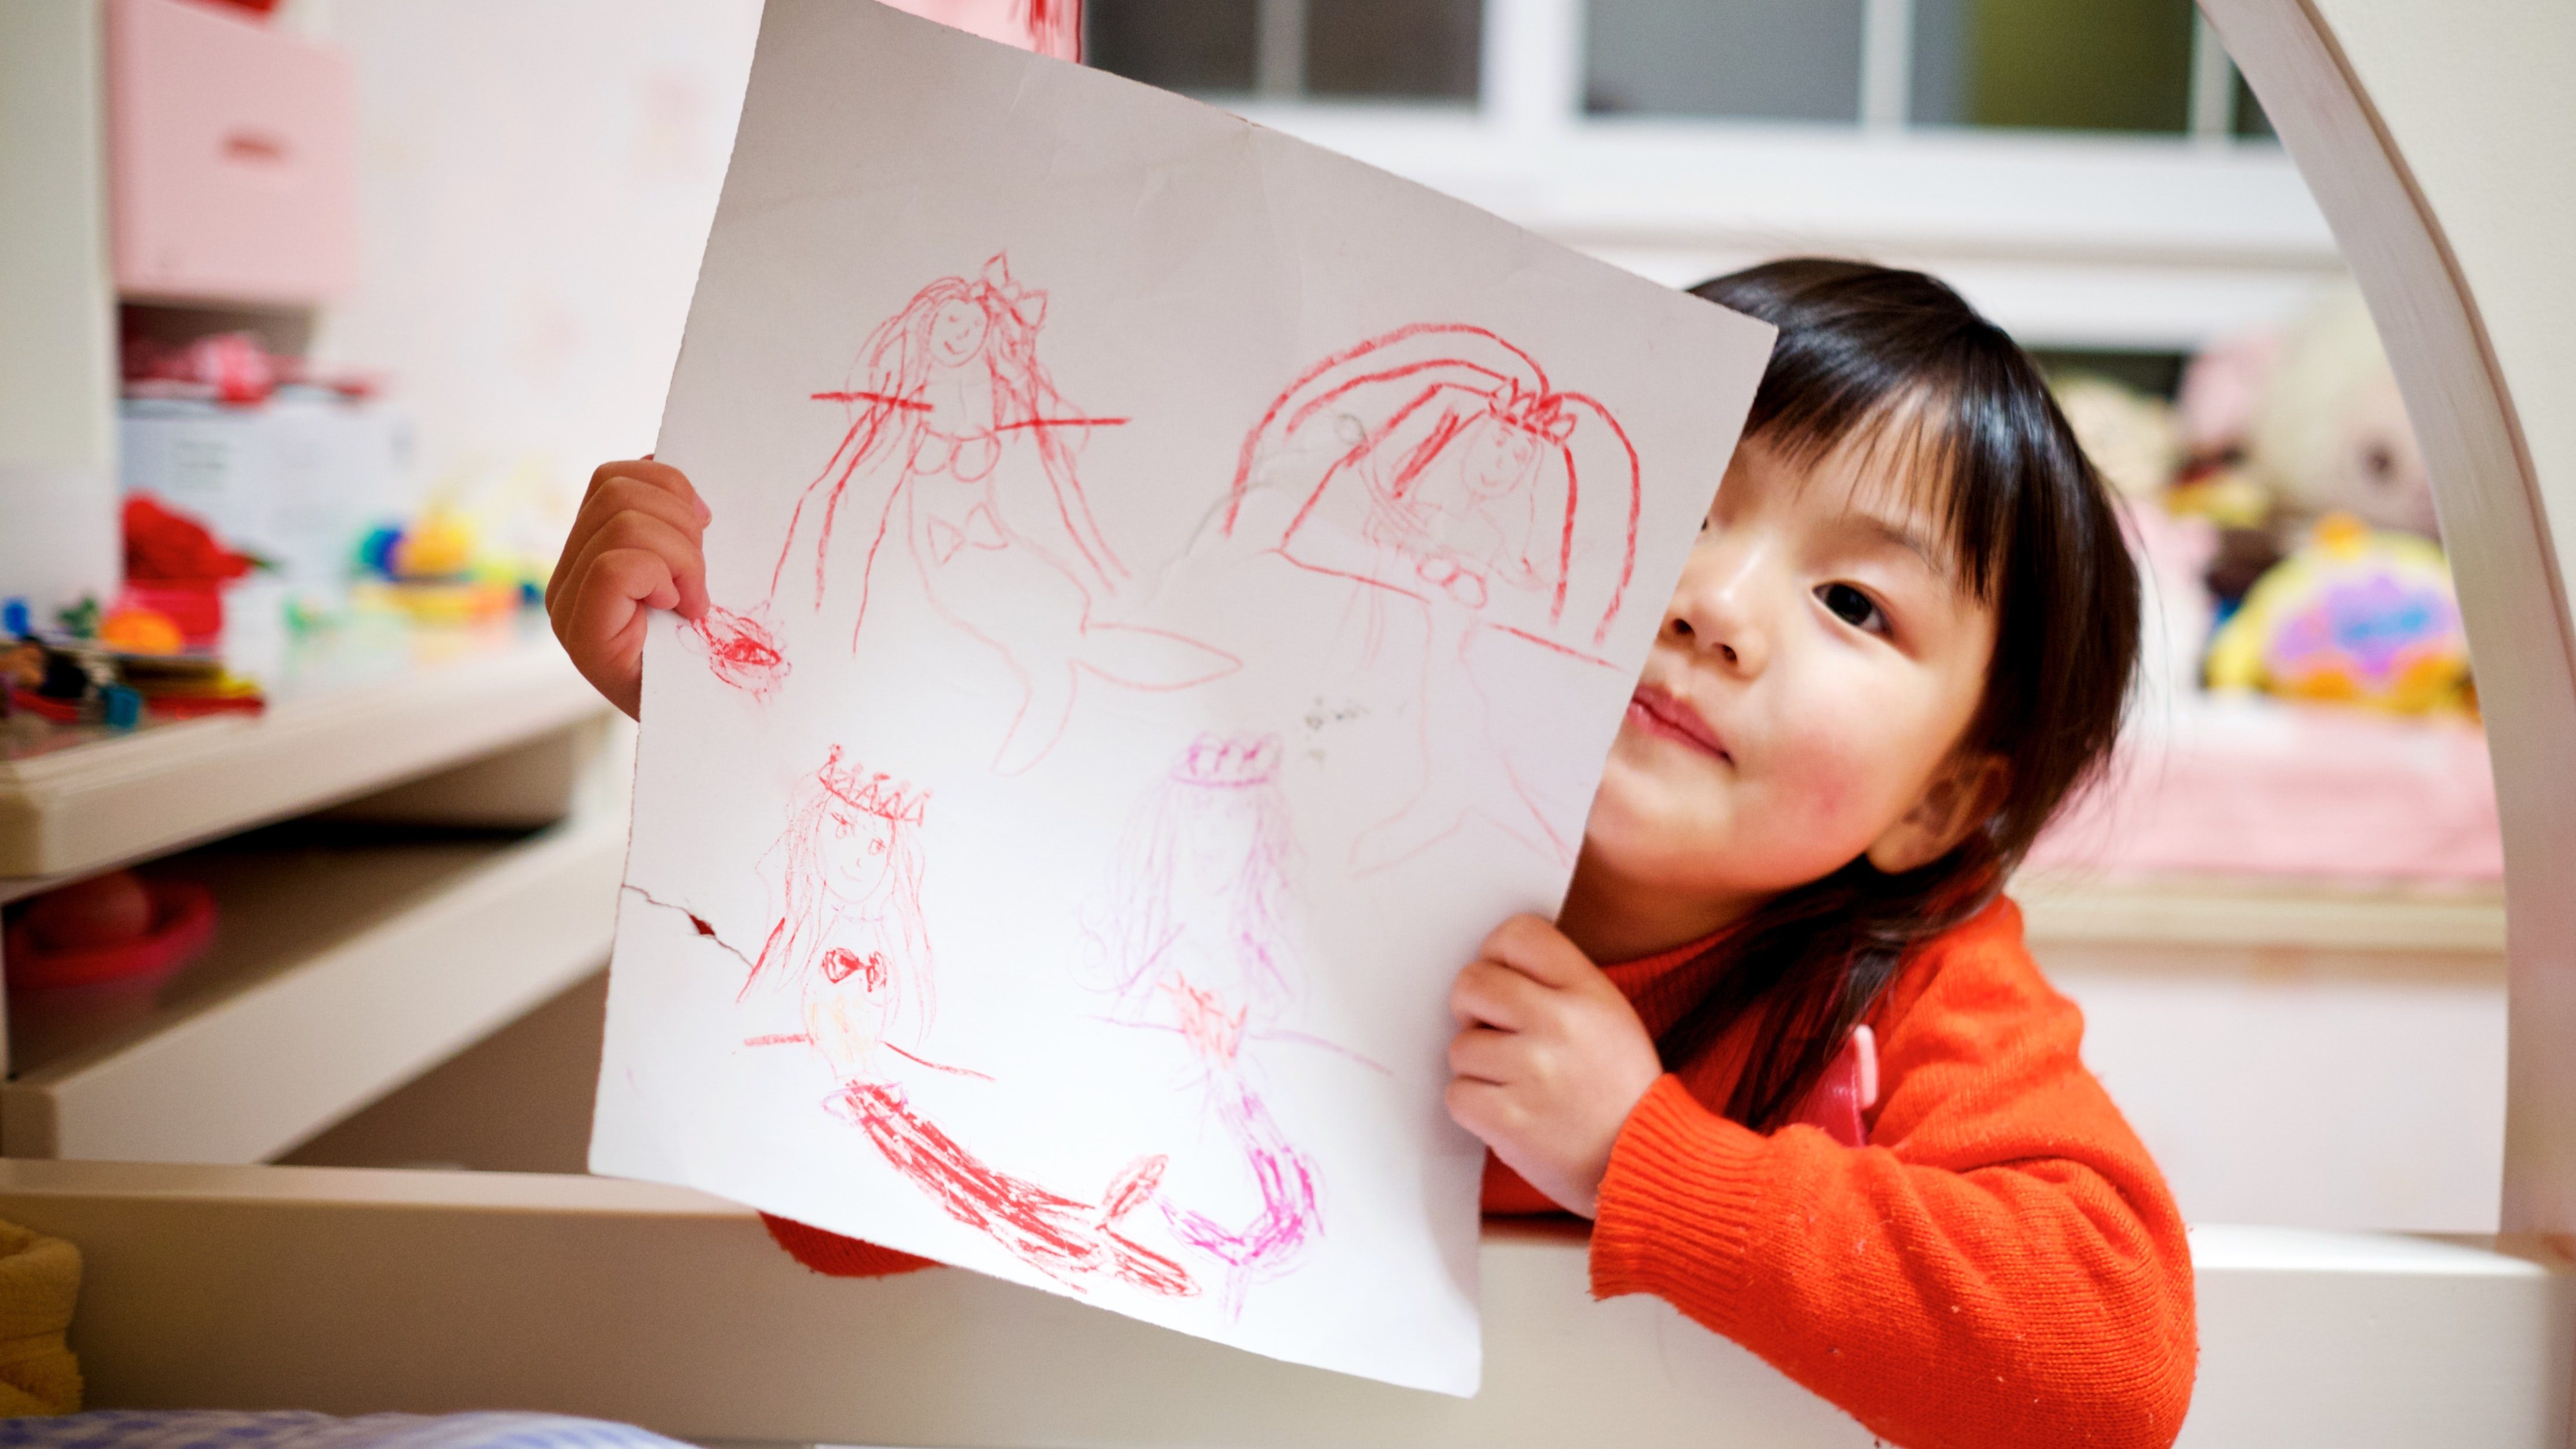 A child showing their drawing to the camera